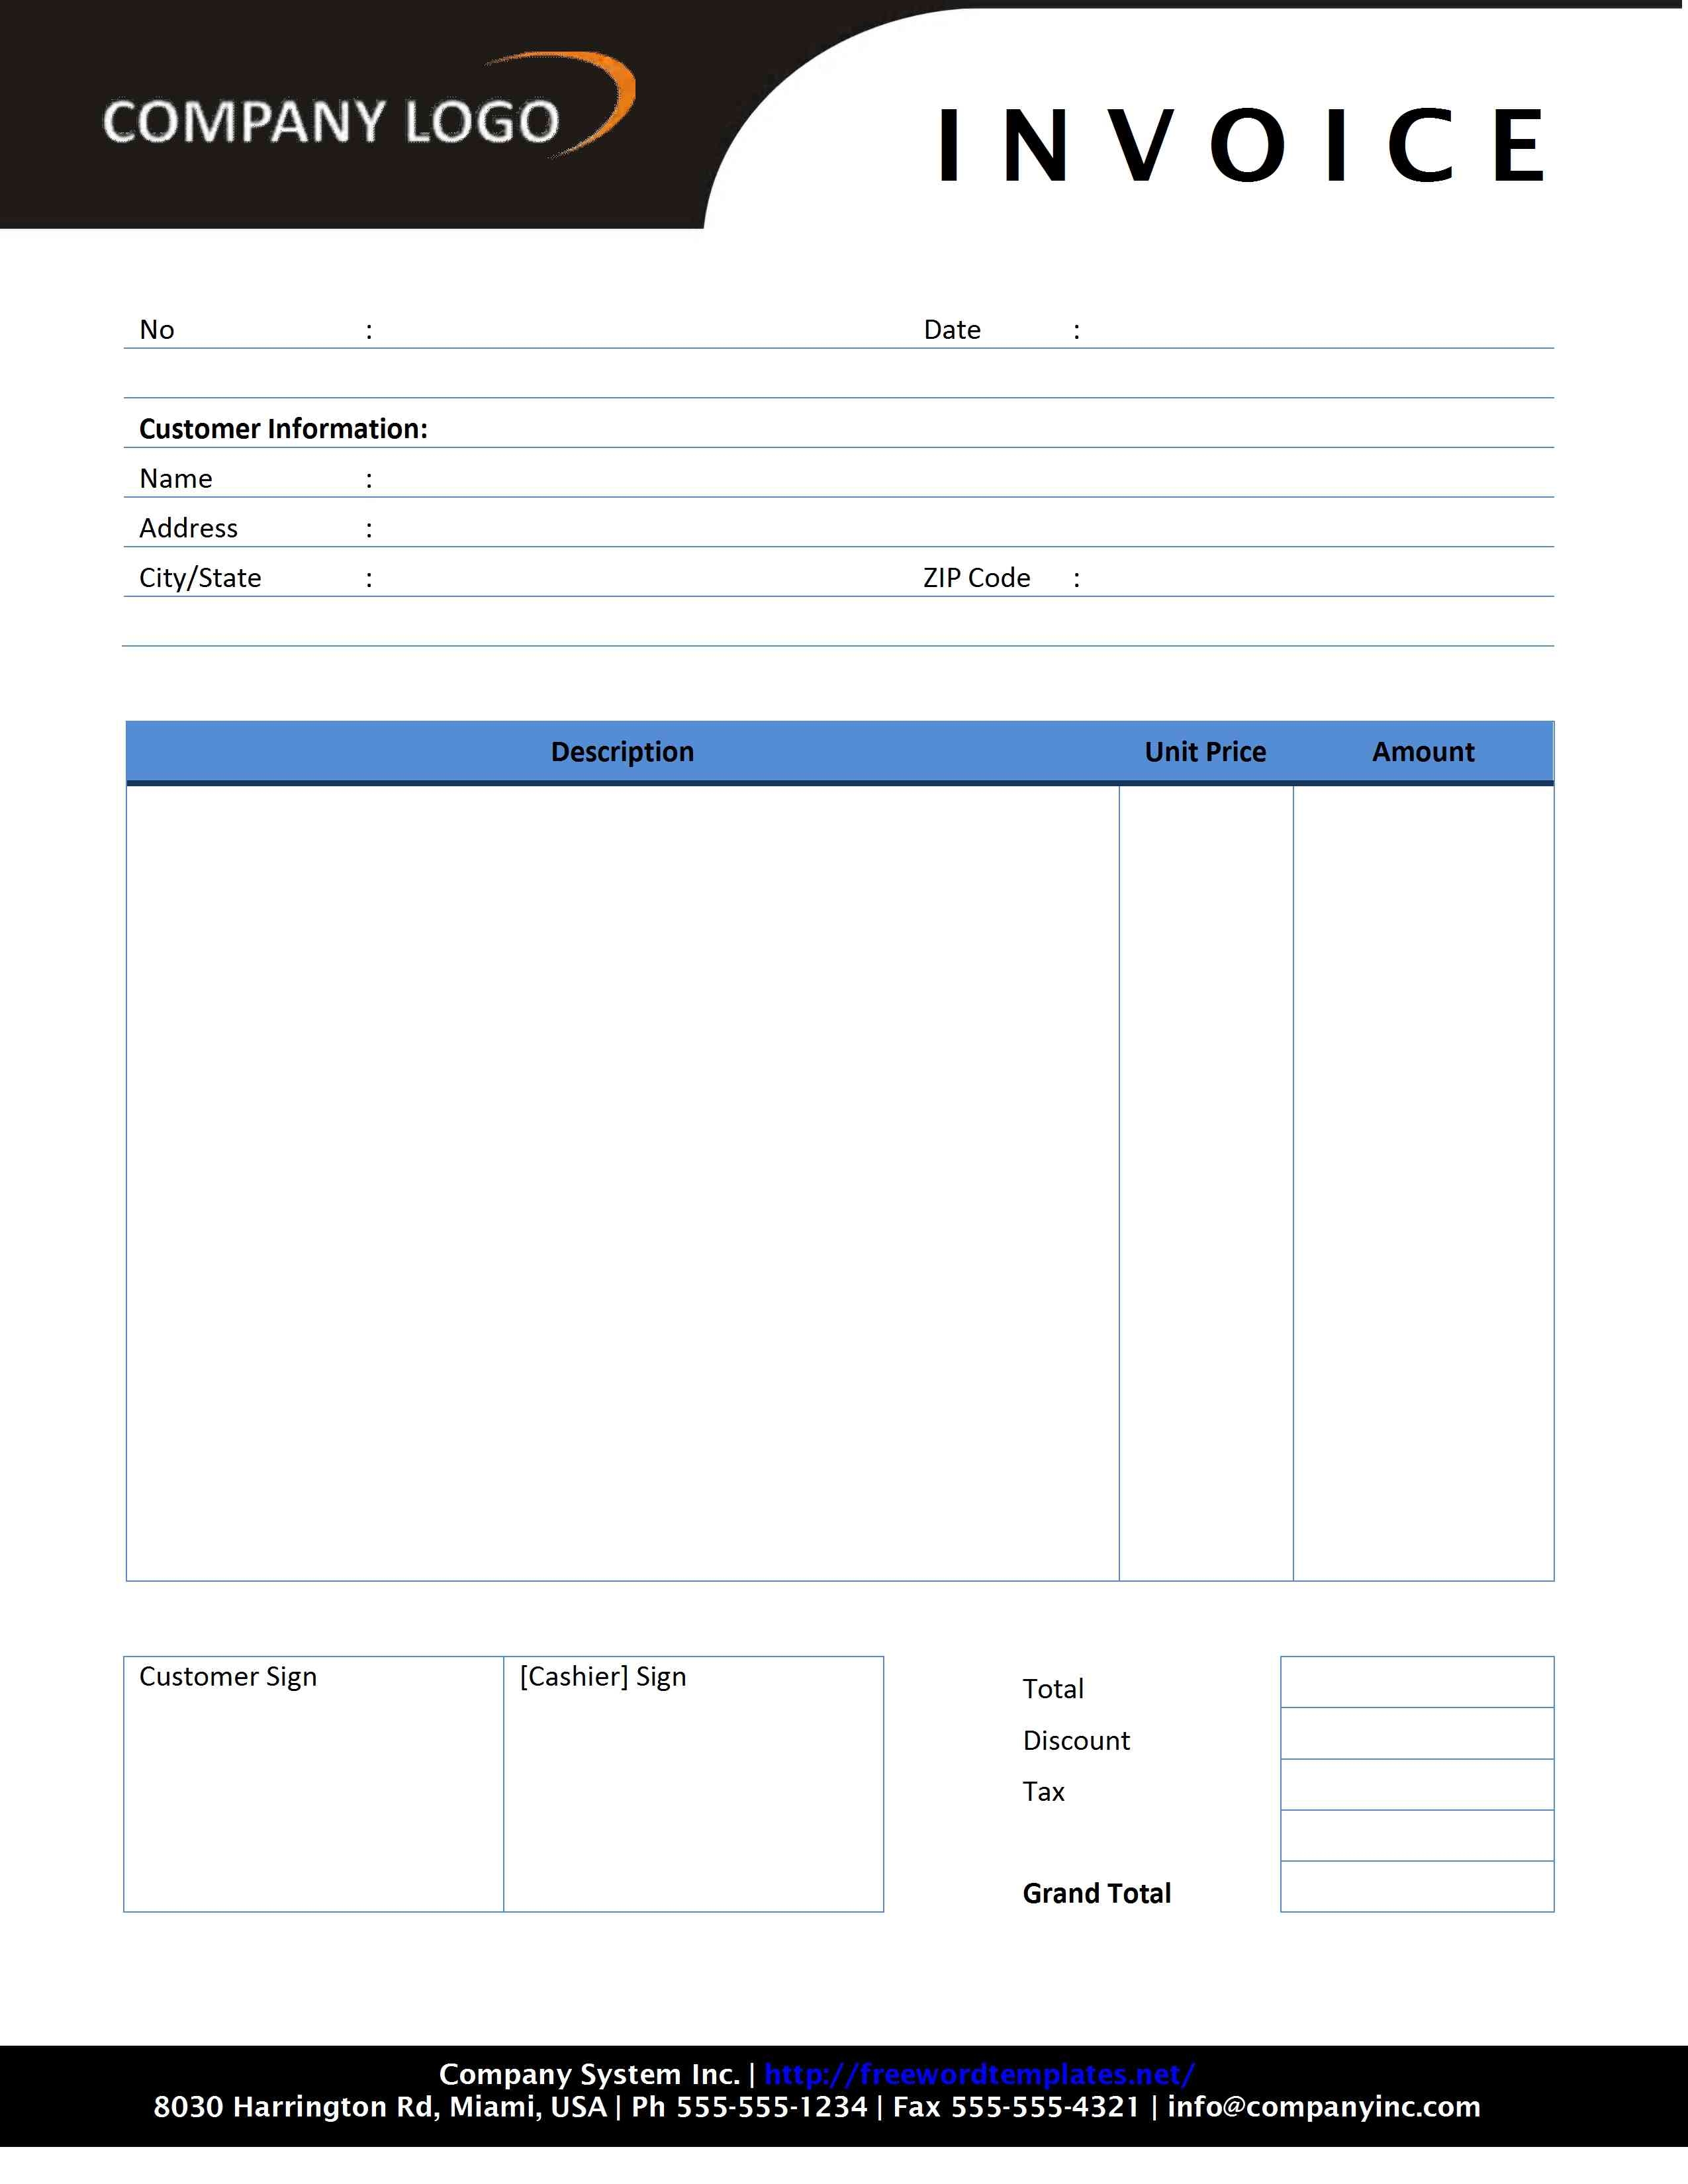 invoice format in word free invoice template microsoft word invoice format word